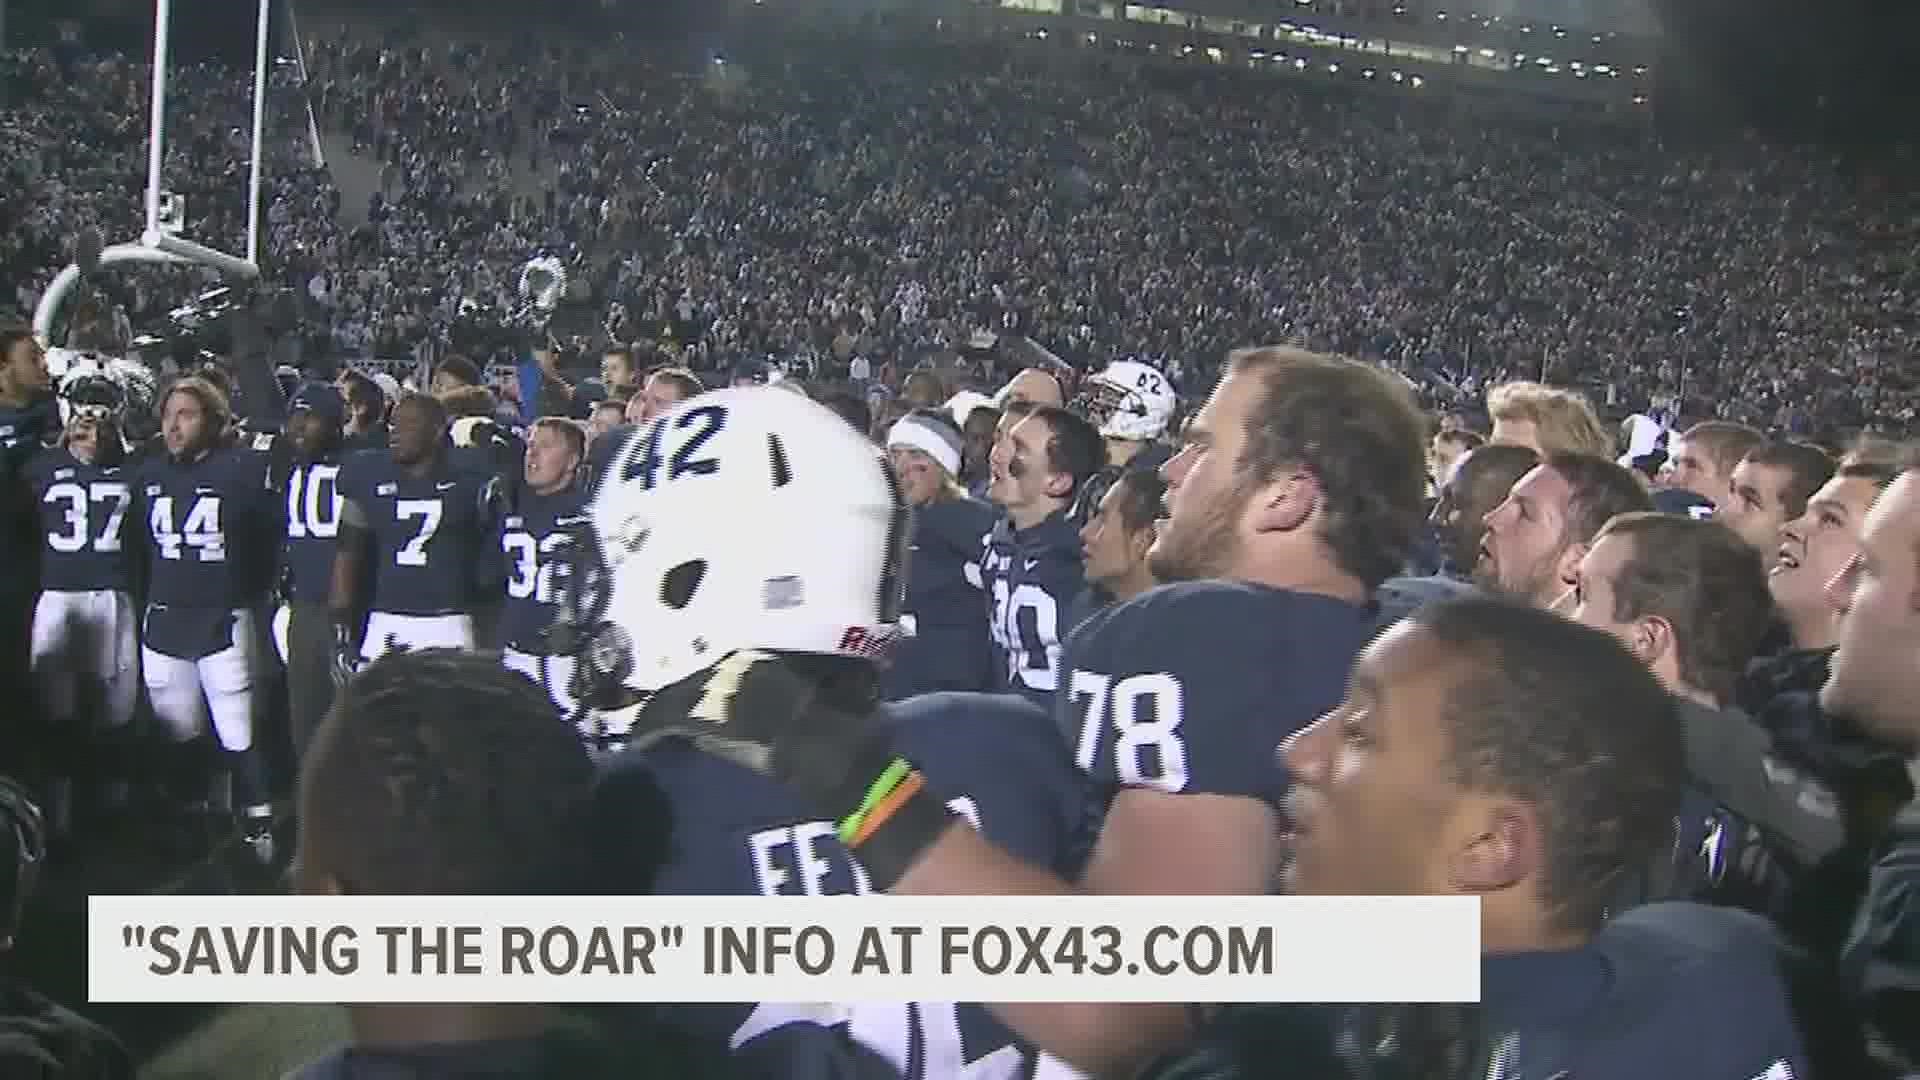 PSU captains Michael Mauti and Michael Zordich say there's a lot fans didn't realize about the team that stuck together despite harsh NCAA sanctions